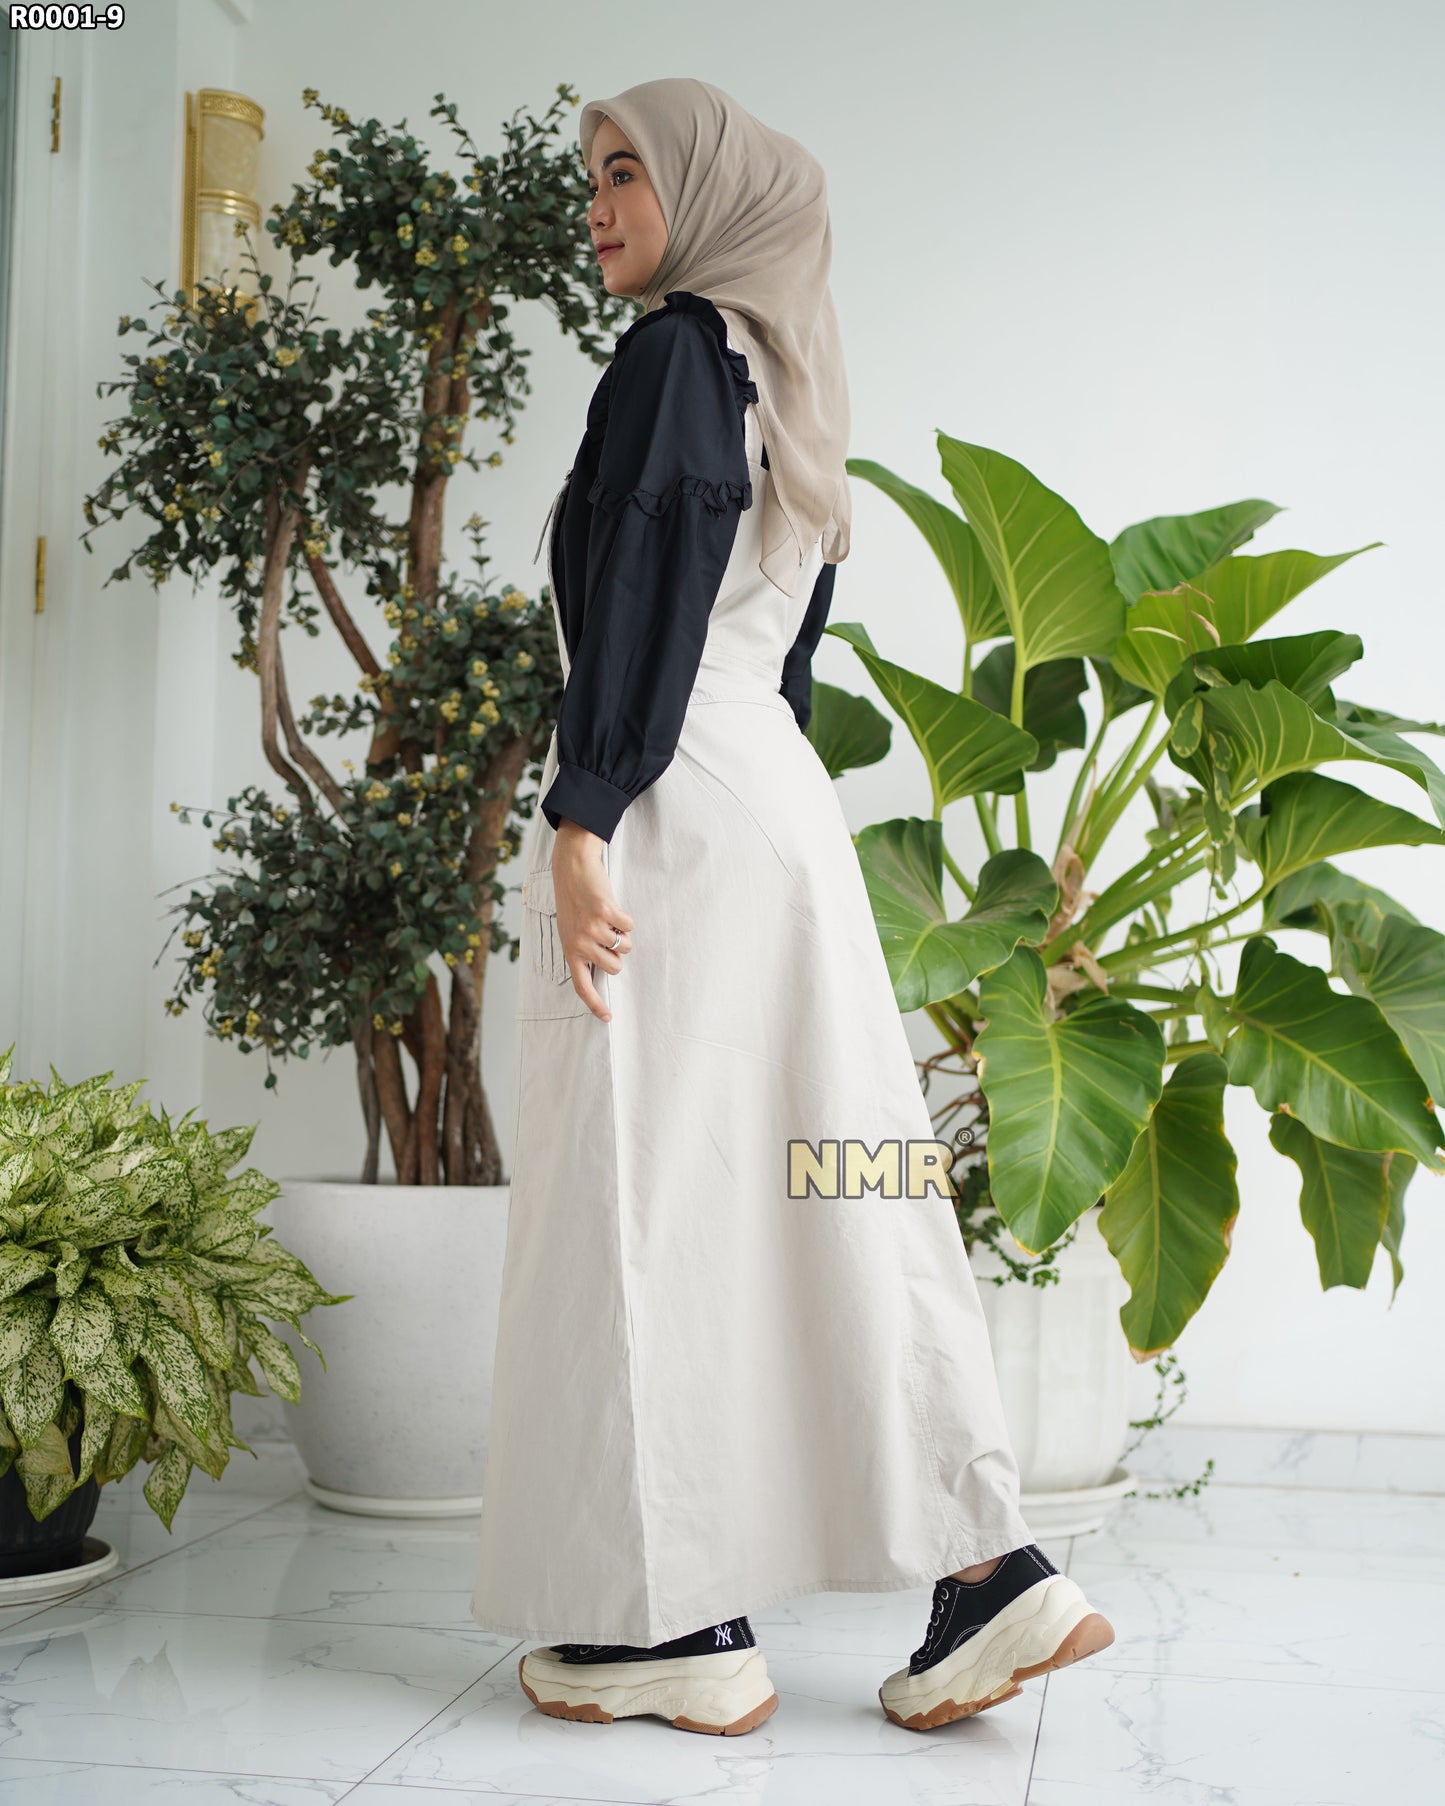 NMR Gamis Jumpsuit Overall Baby Canvas Vol R001-9